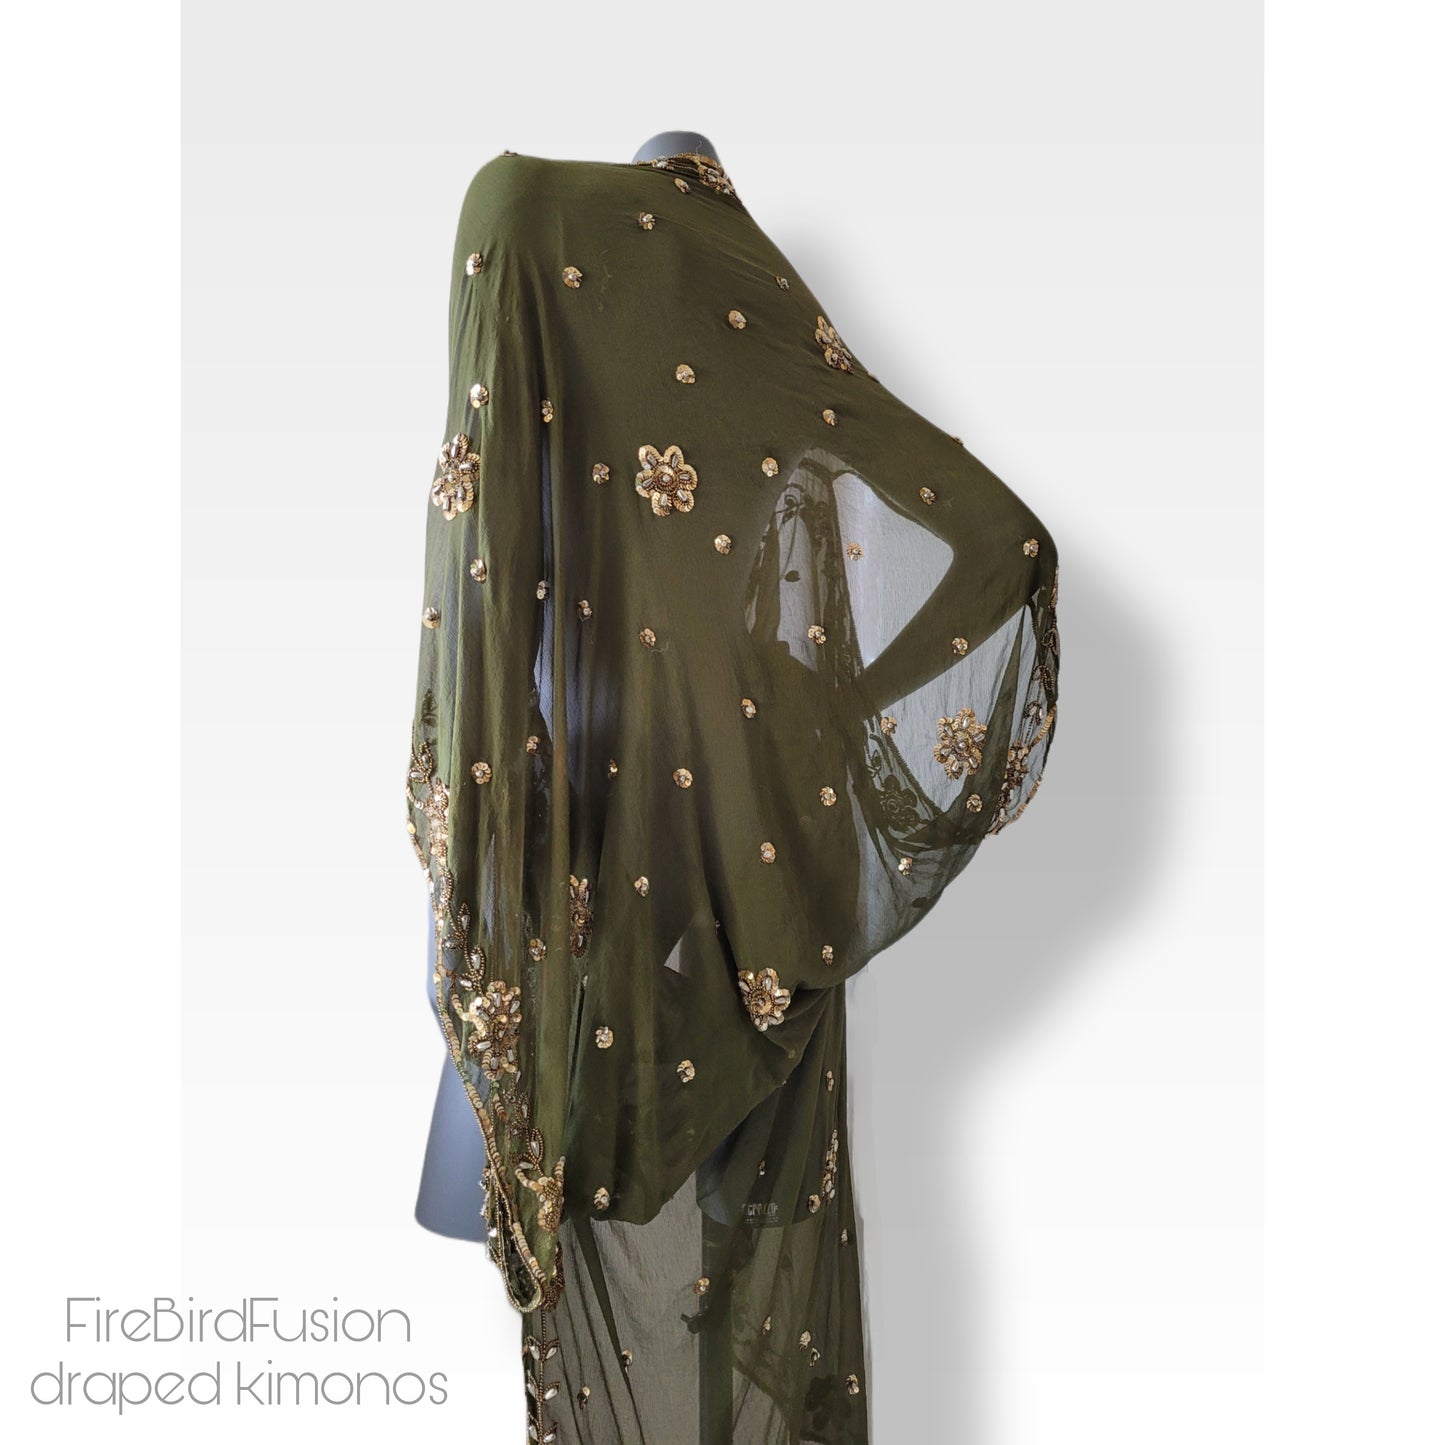 Draped kimono in green with elaborated hand embrodery in gold (M)